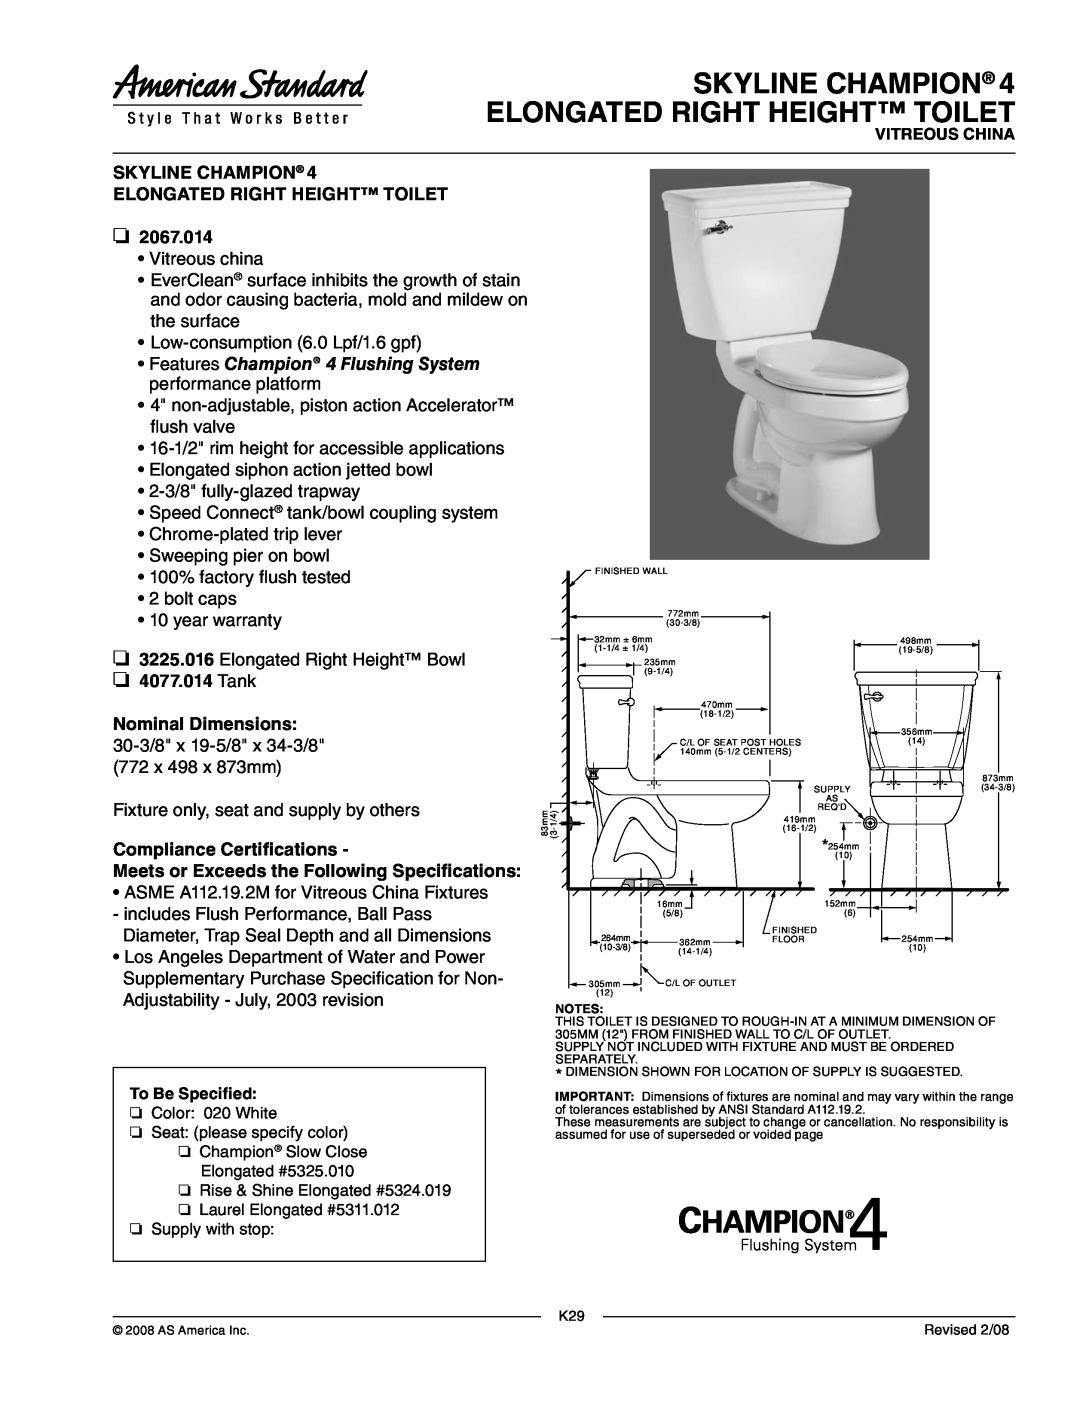 American Standard 2067.014 dimensions Skyline Champion Elongated Right Height Toilet, Tank Nominal Dimensions 